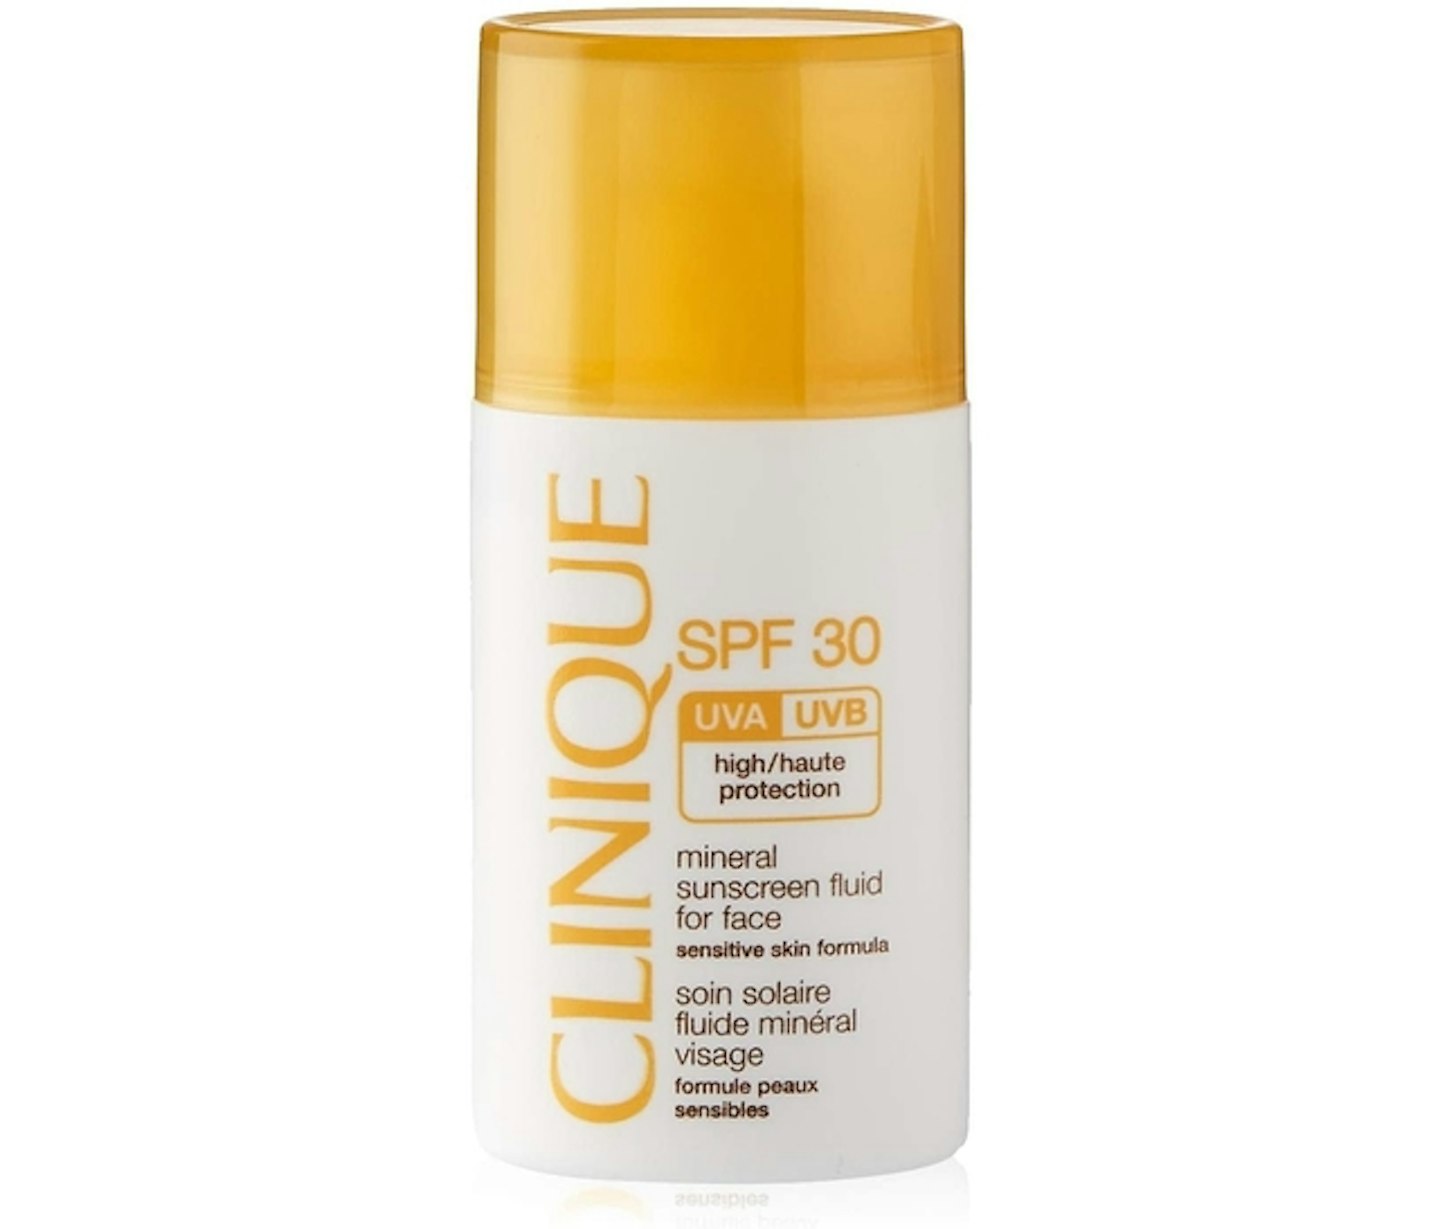 Clinique SPF 30 Mineral Sunscreen Fluid for face